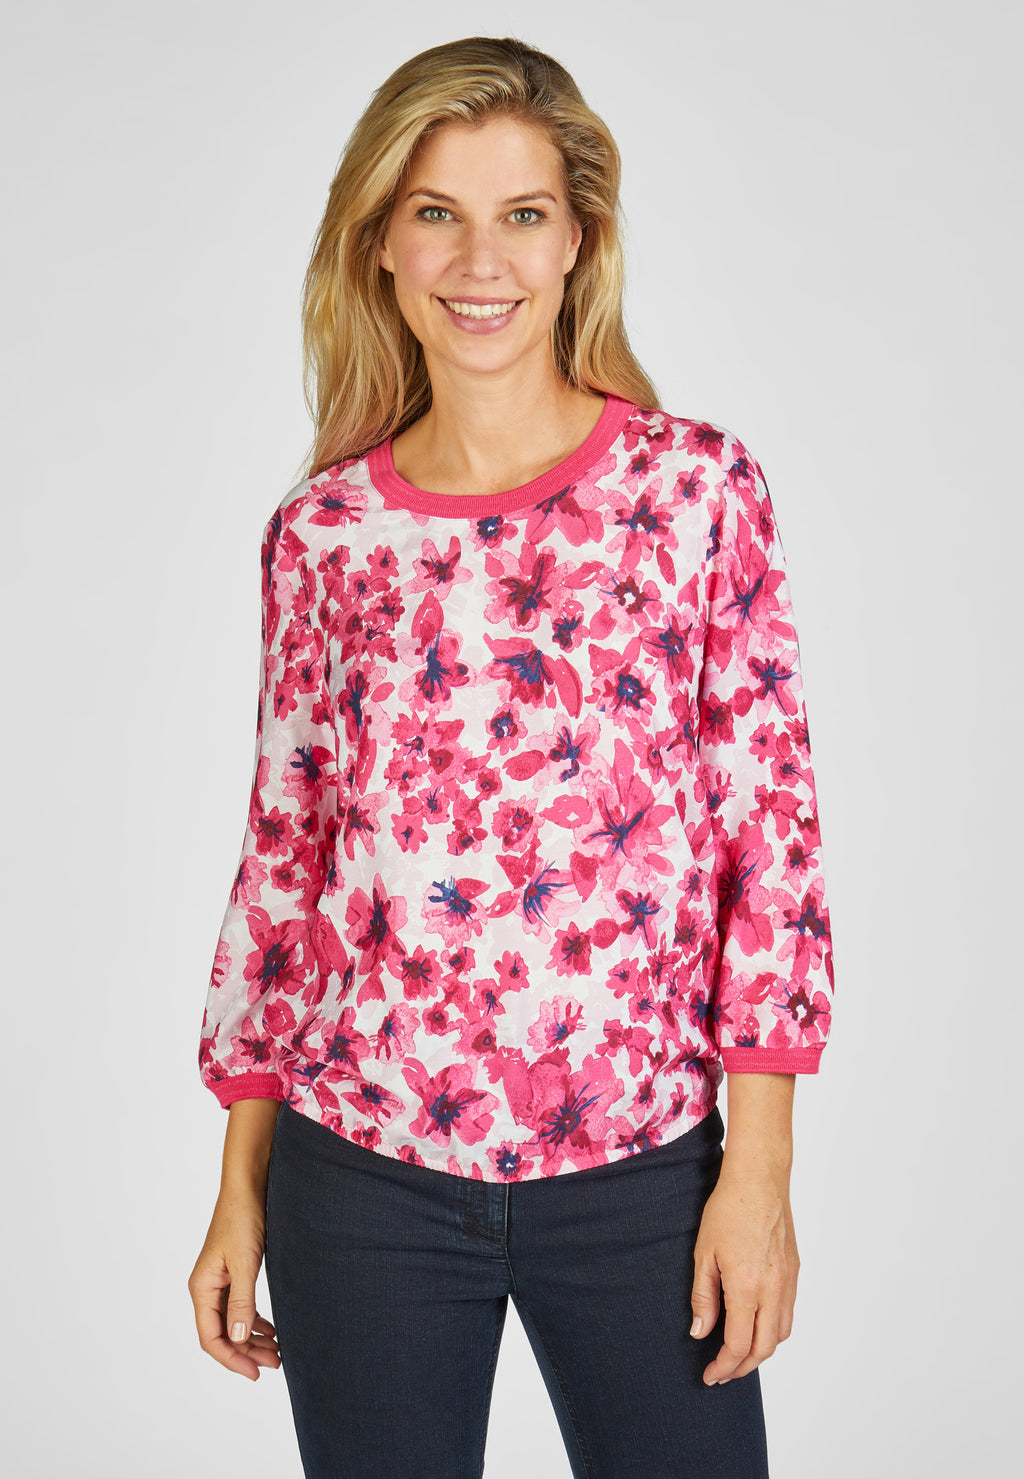 Rabe blossom up collection floral printed blouse in pink with navy and white, product code 52-222101